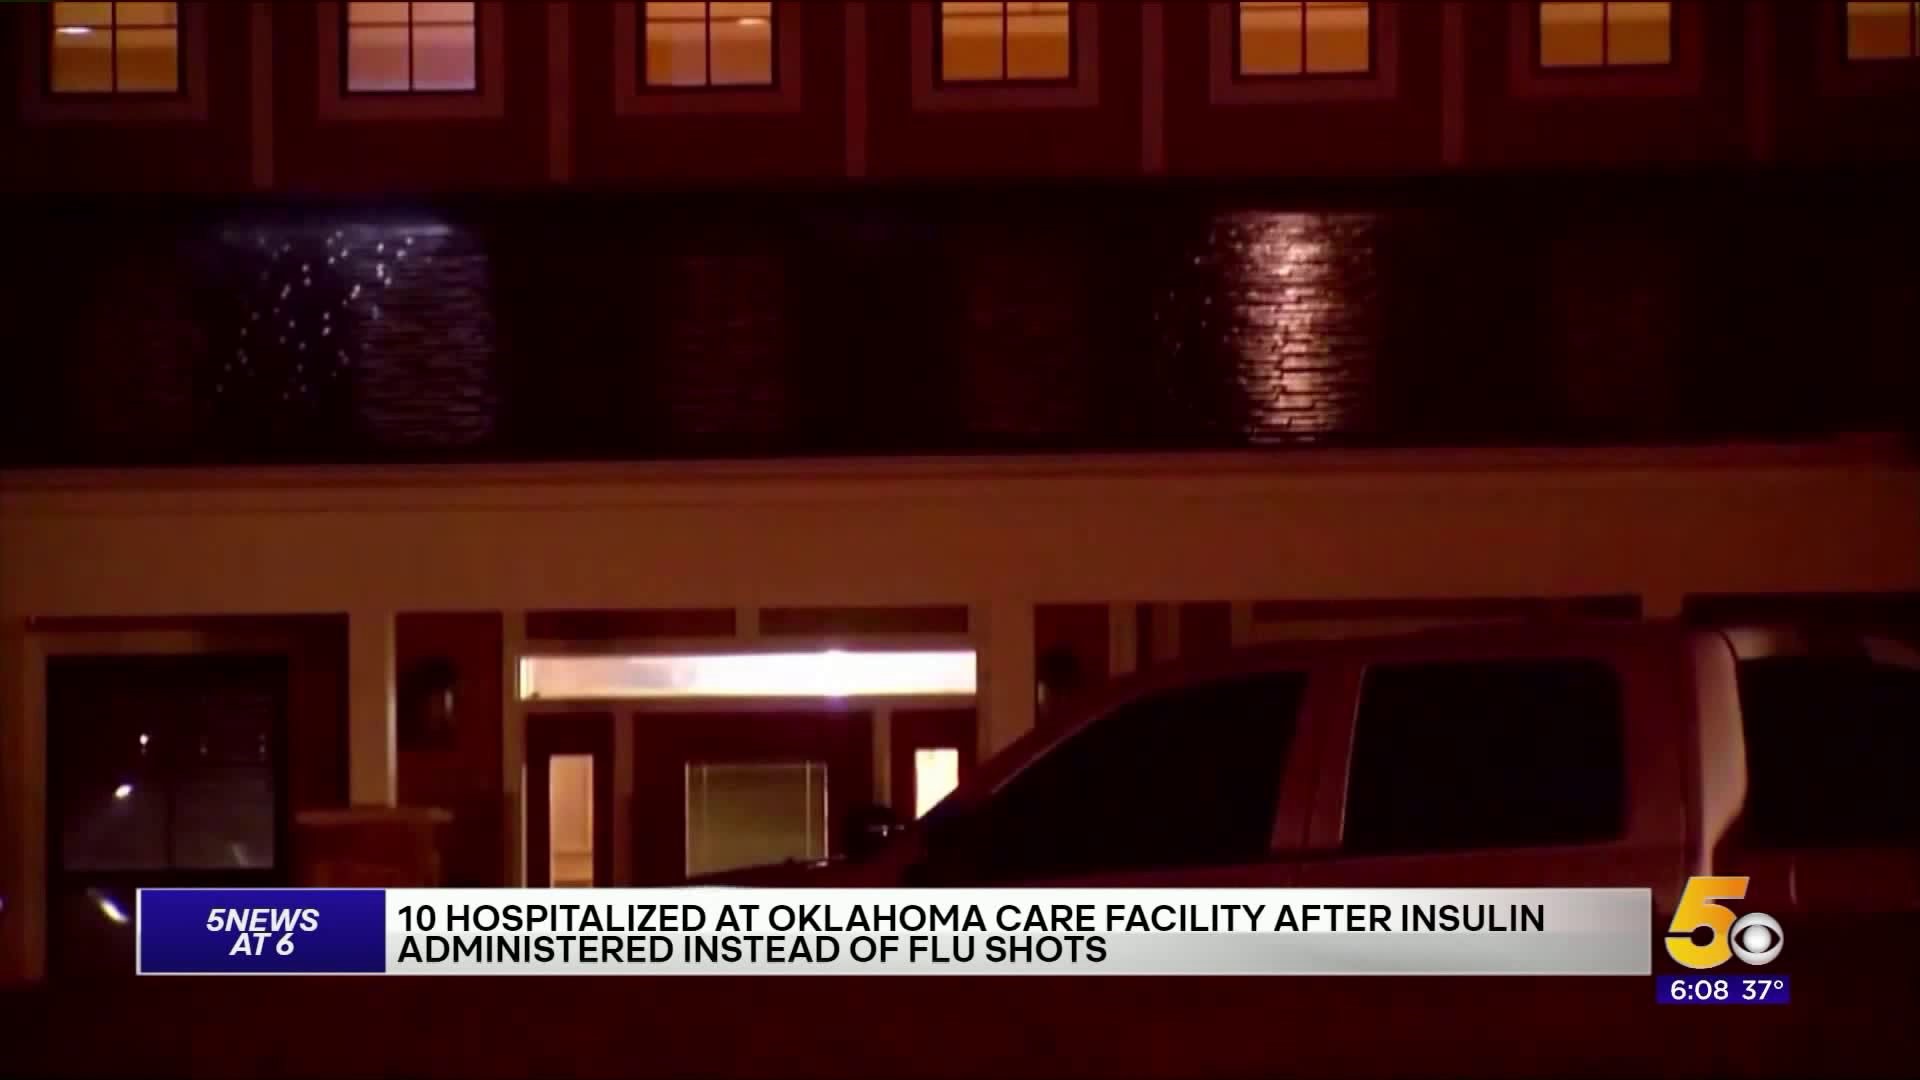 10 People At Oklahoma Care Facility Hospitalized After Insulin Administered Instead Of Flu Shots